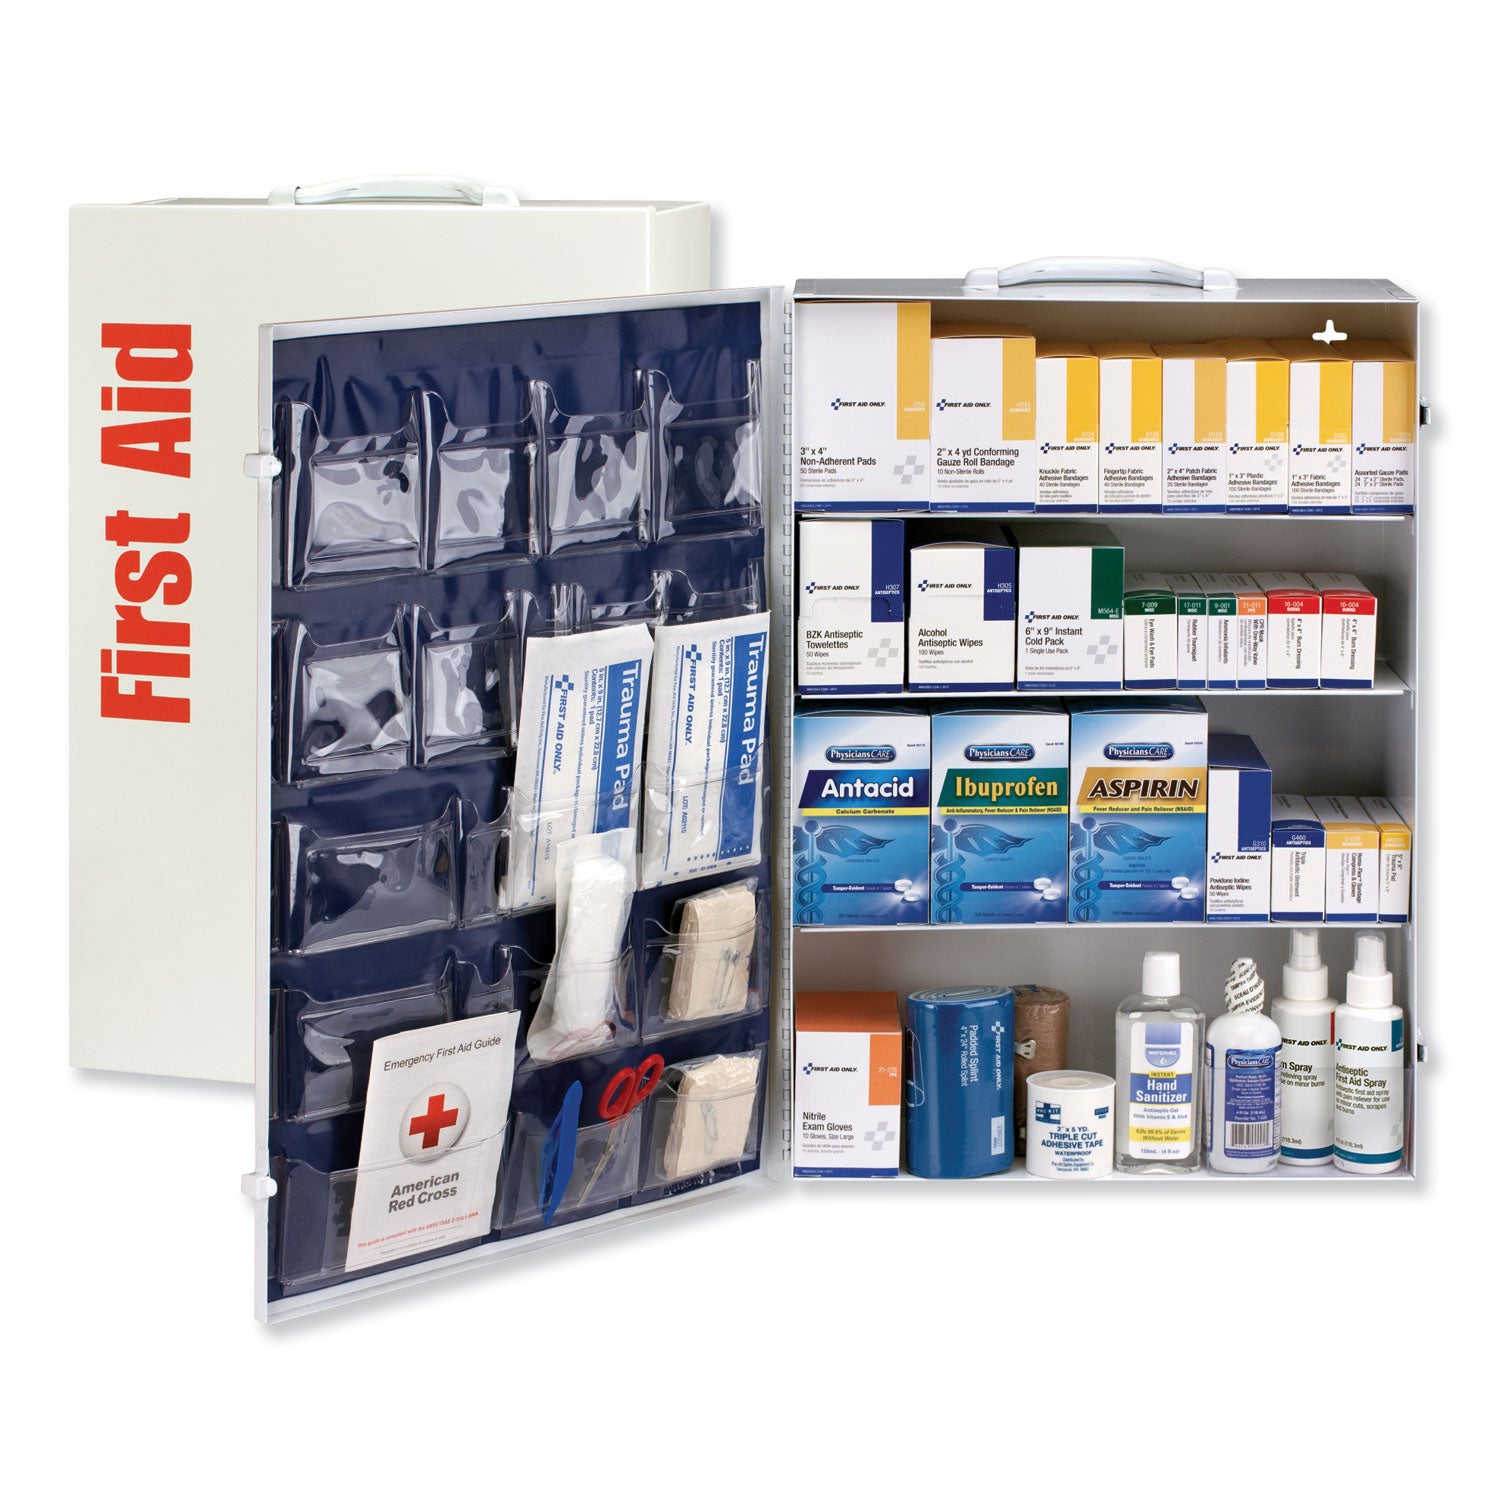 ansi-class-b+-4-shelf-first-aid-station-with-medications-1461-pieces-metal-case_fao90576 - 1